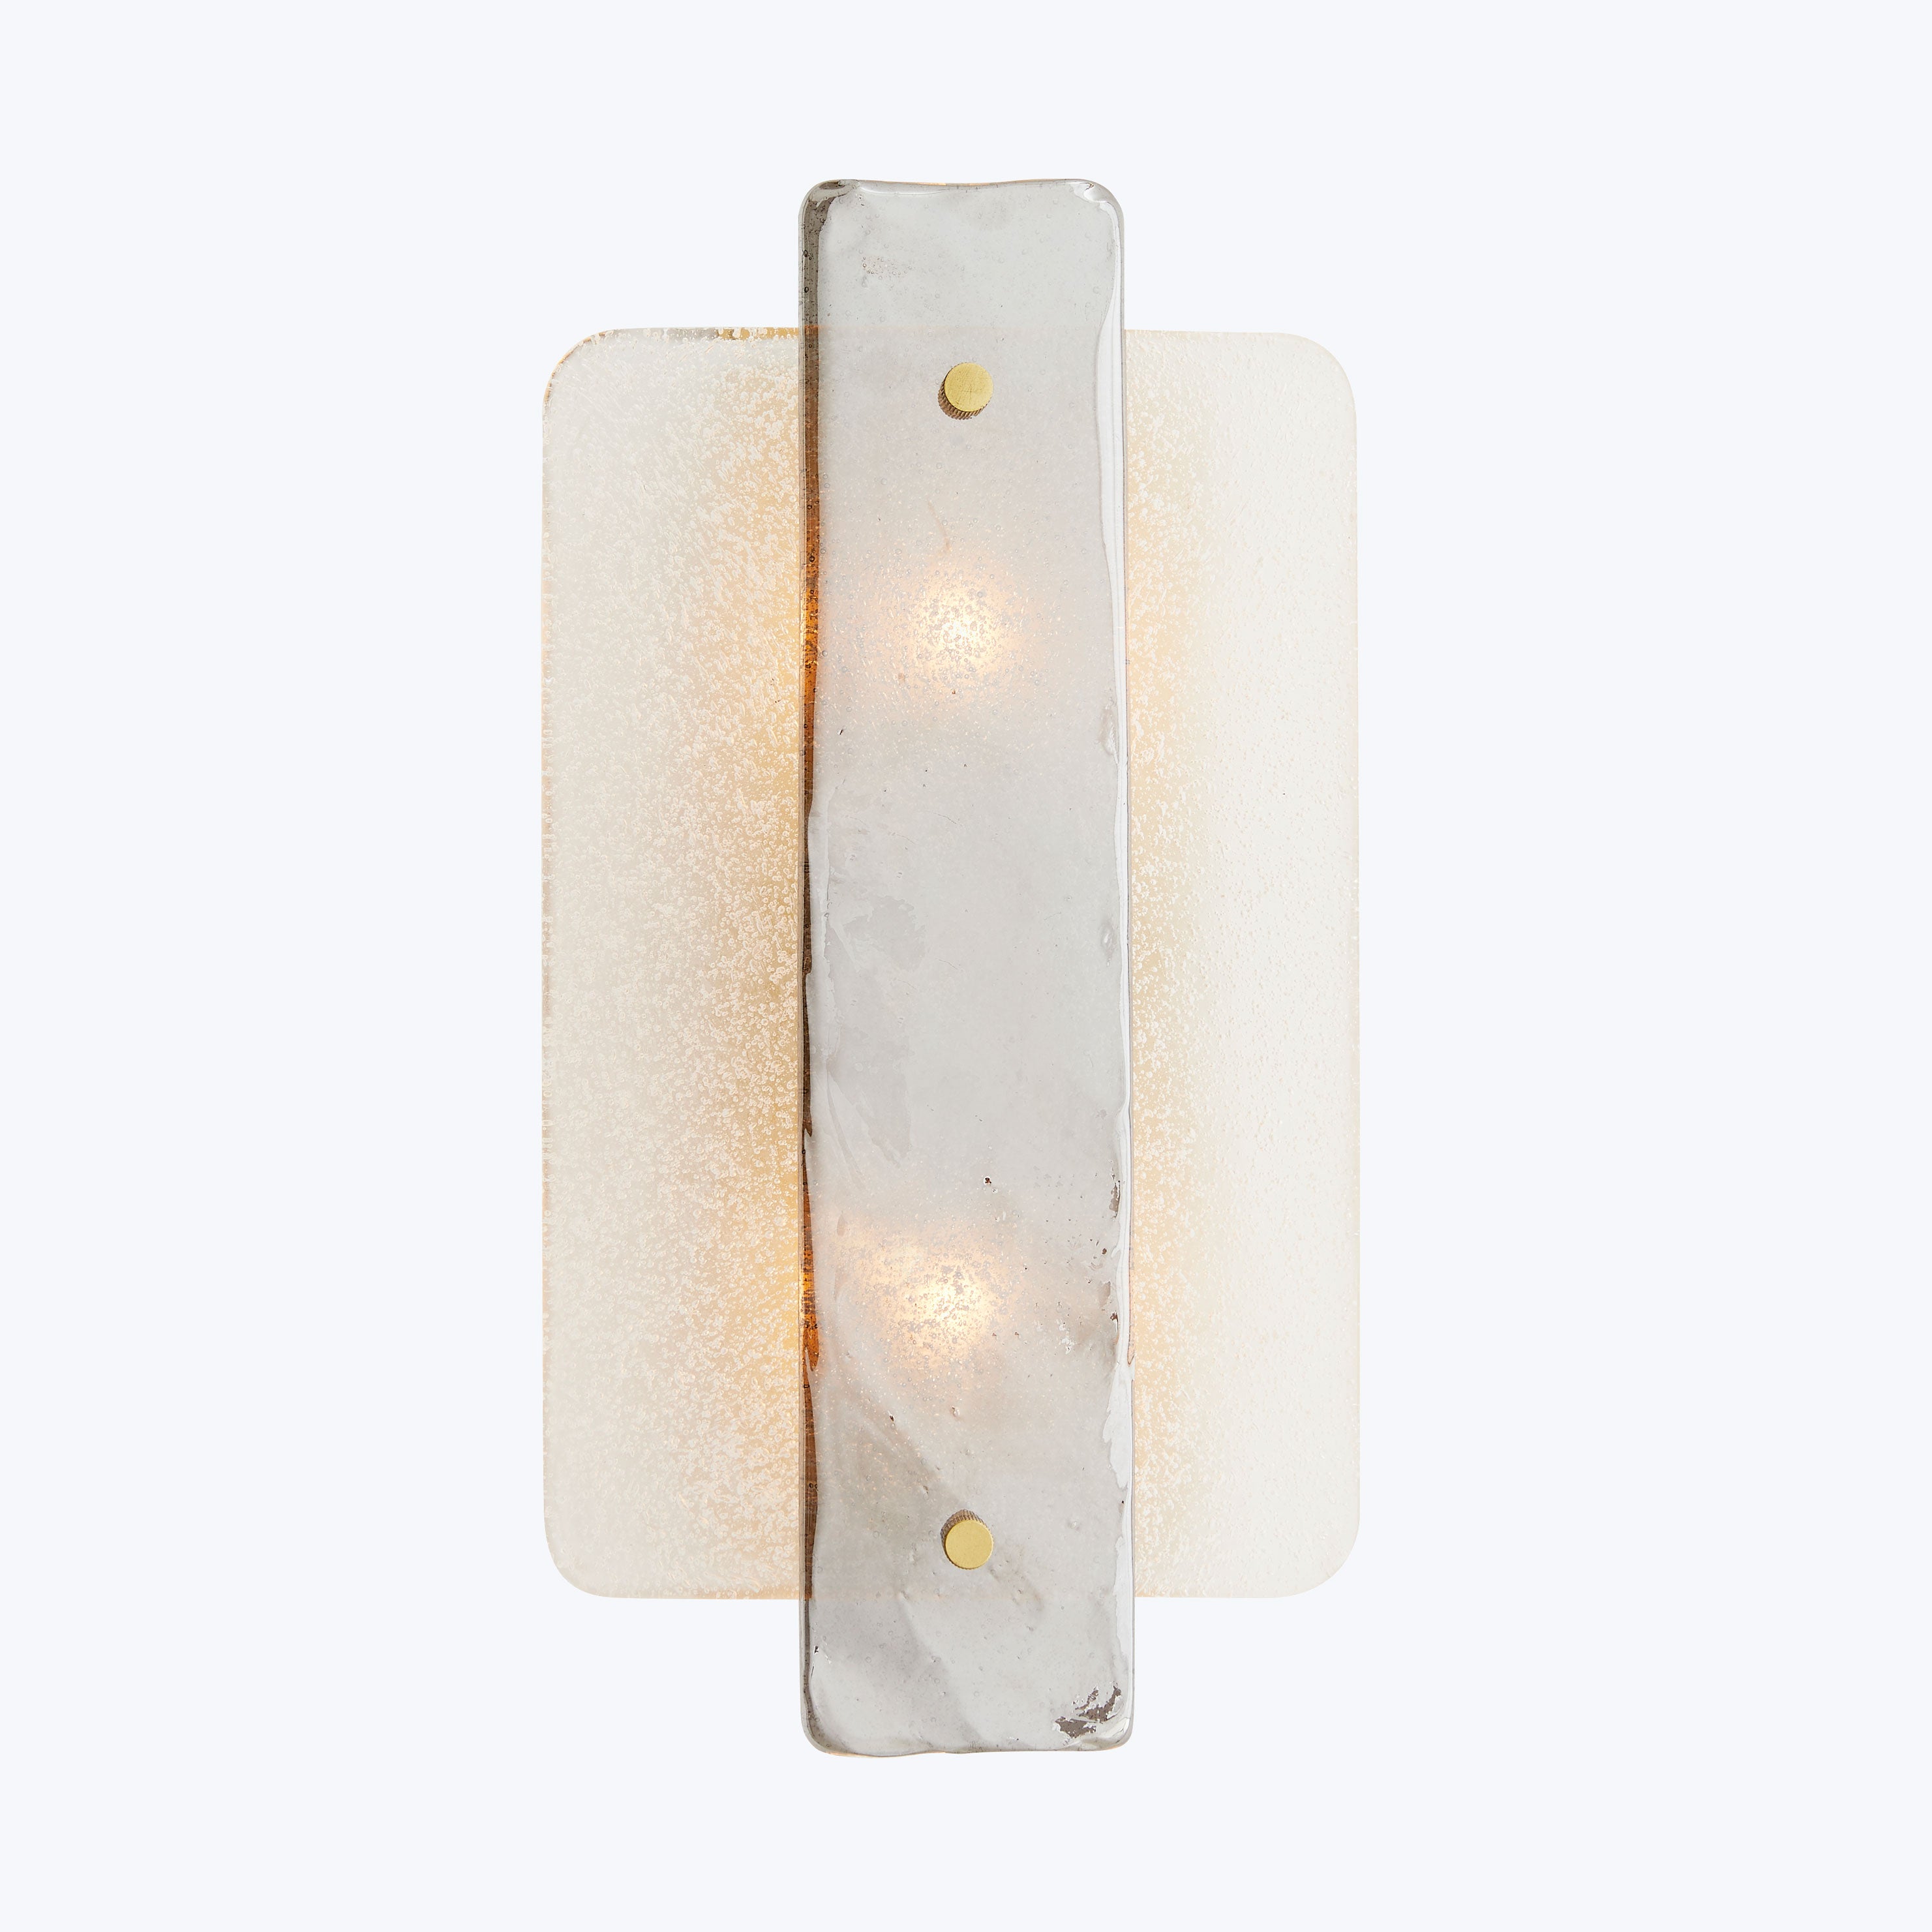 Modern wall sconce with translucent panels creates warm ambient glow.